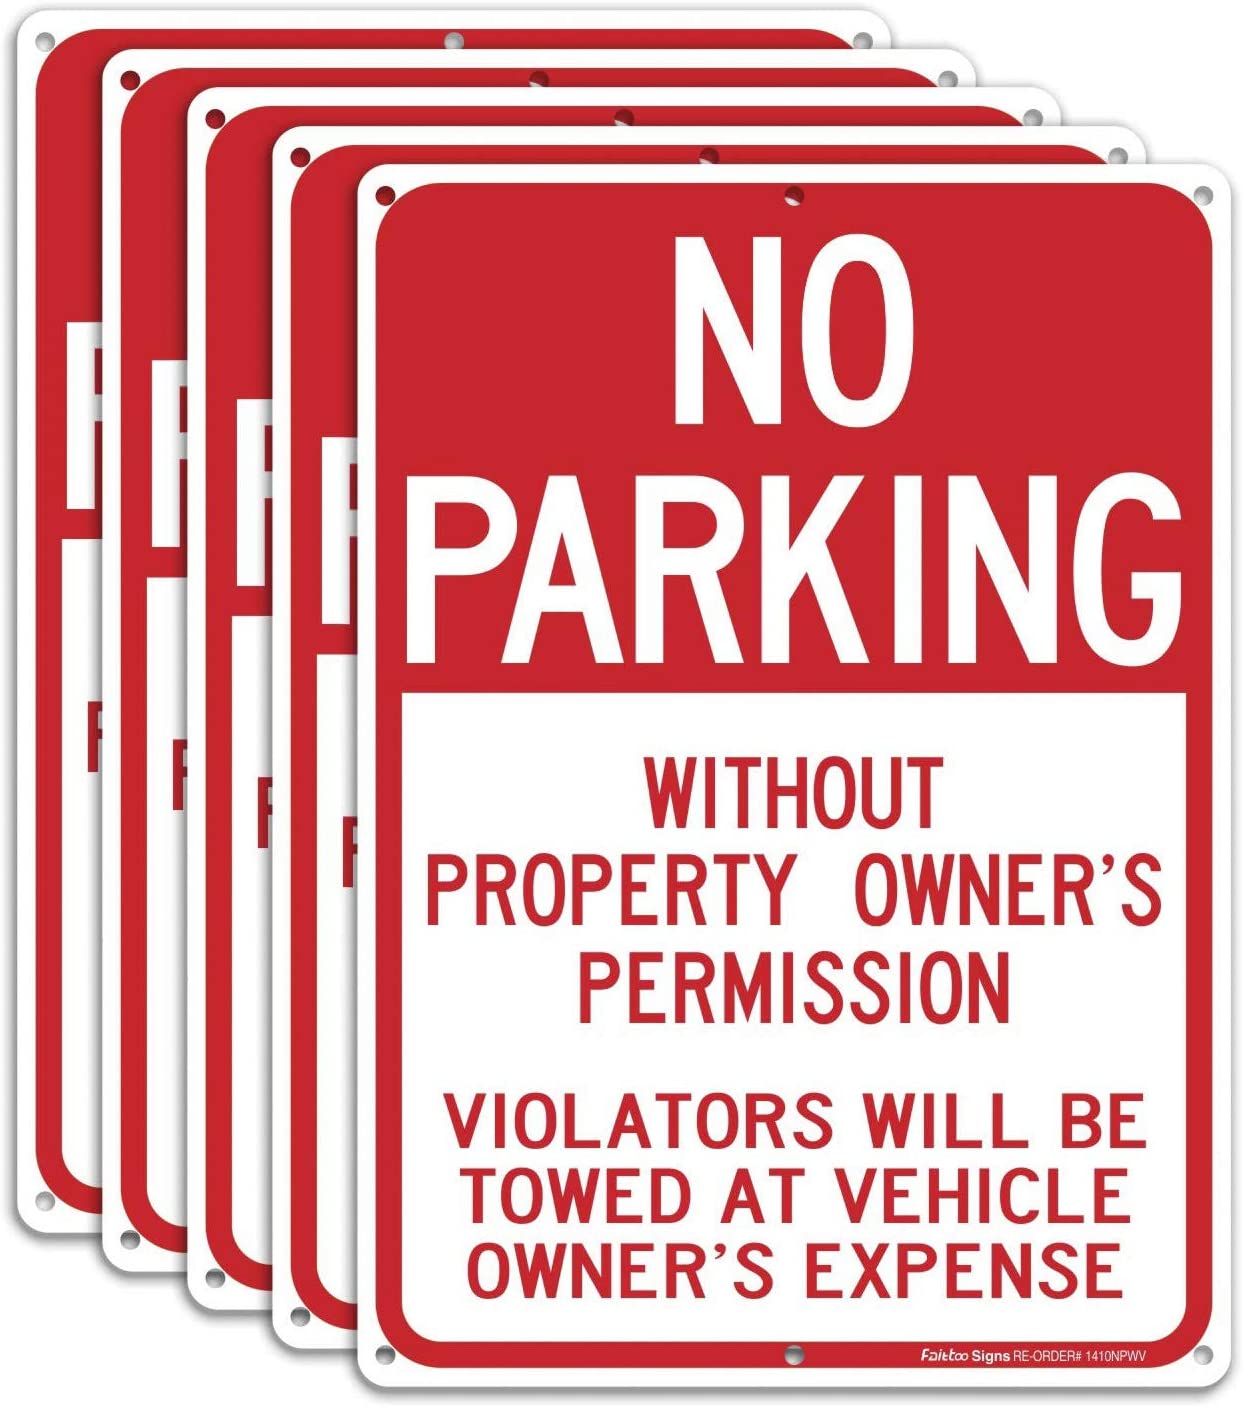 No Parking Without Property Owner's Permission Sign, Violators Will Be Towed at Vehicle Owner's Expense  14 x 10 Inches .40 Rust Free Aluminum Reflective Sign, UV Protected,Weather Resistant